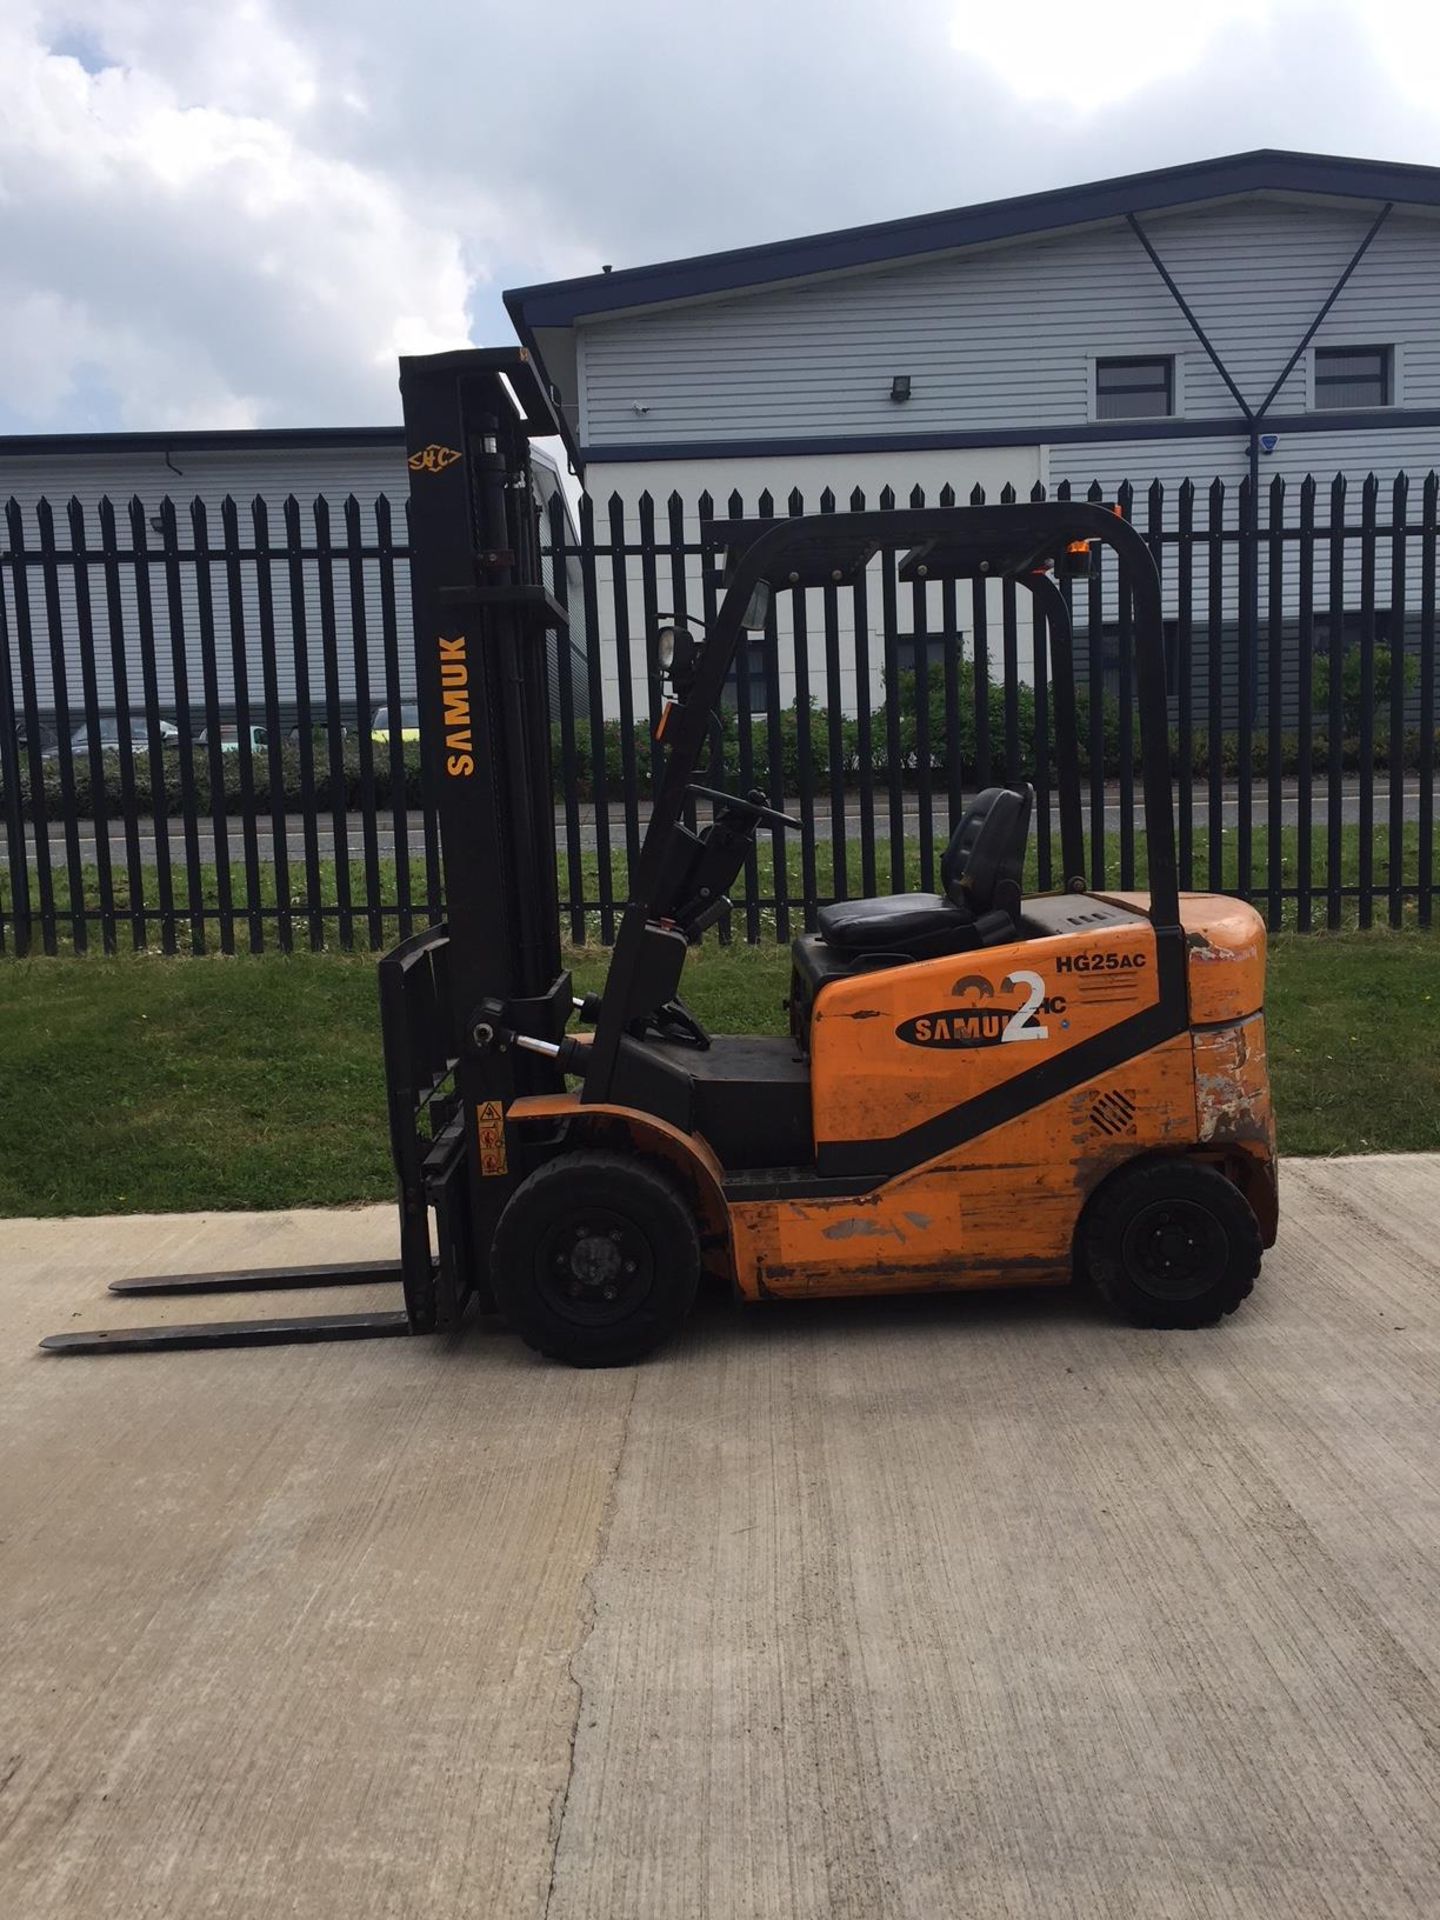 Sam-uk electric counterbalance fork lift truck - Image 7 of 10